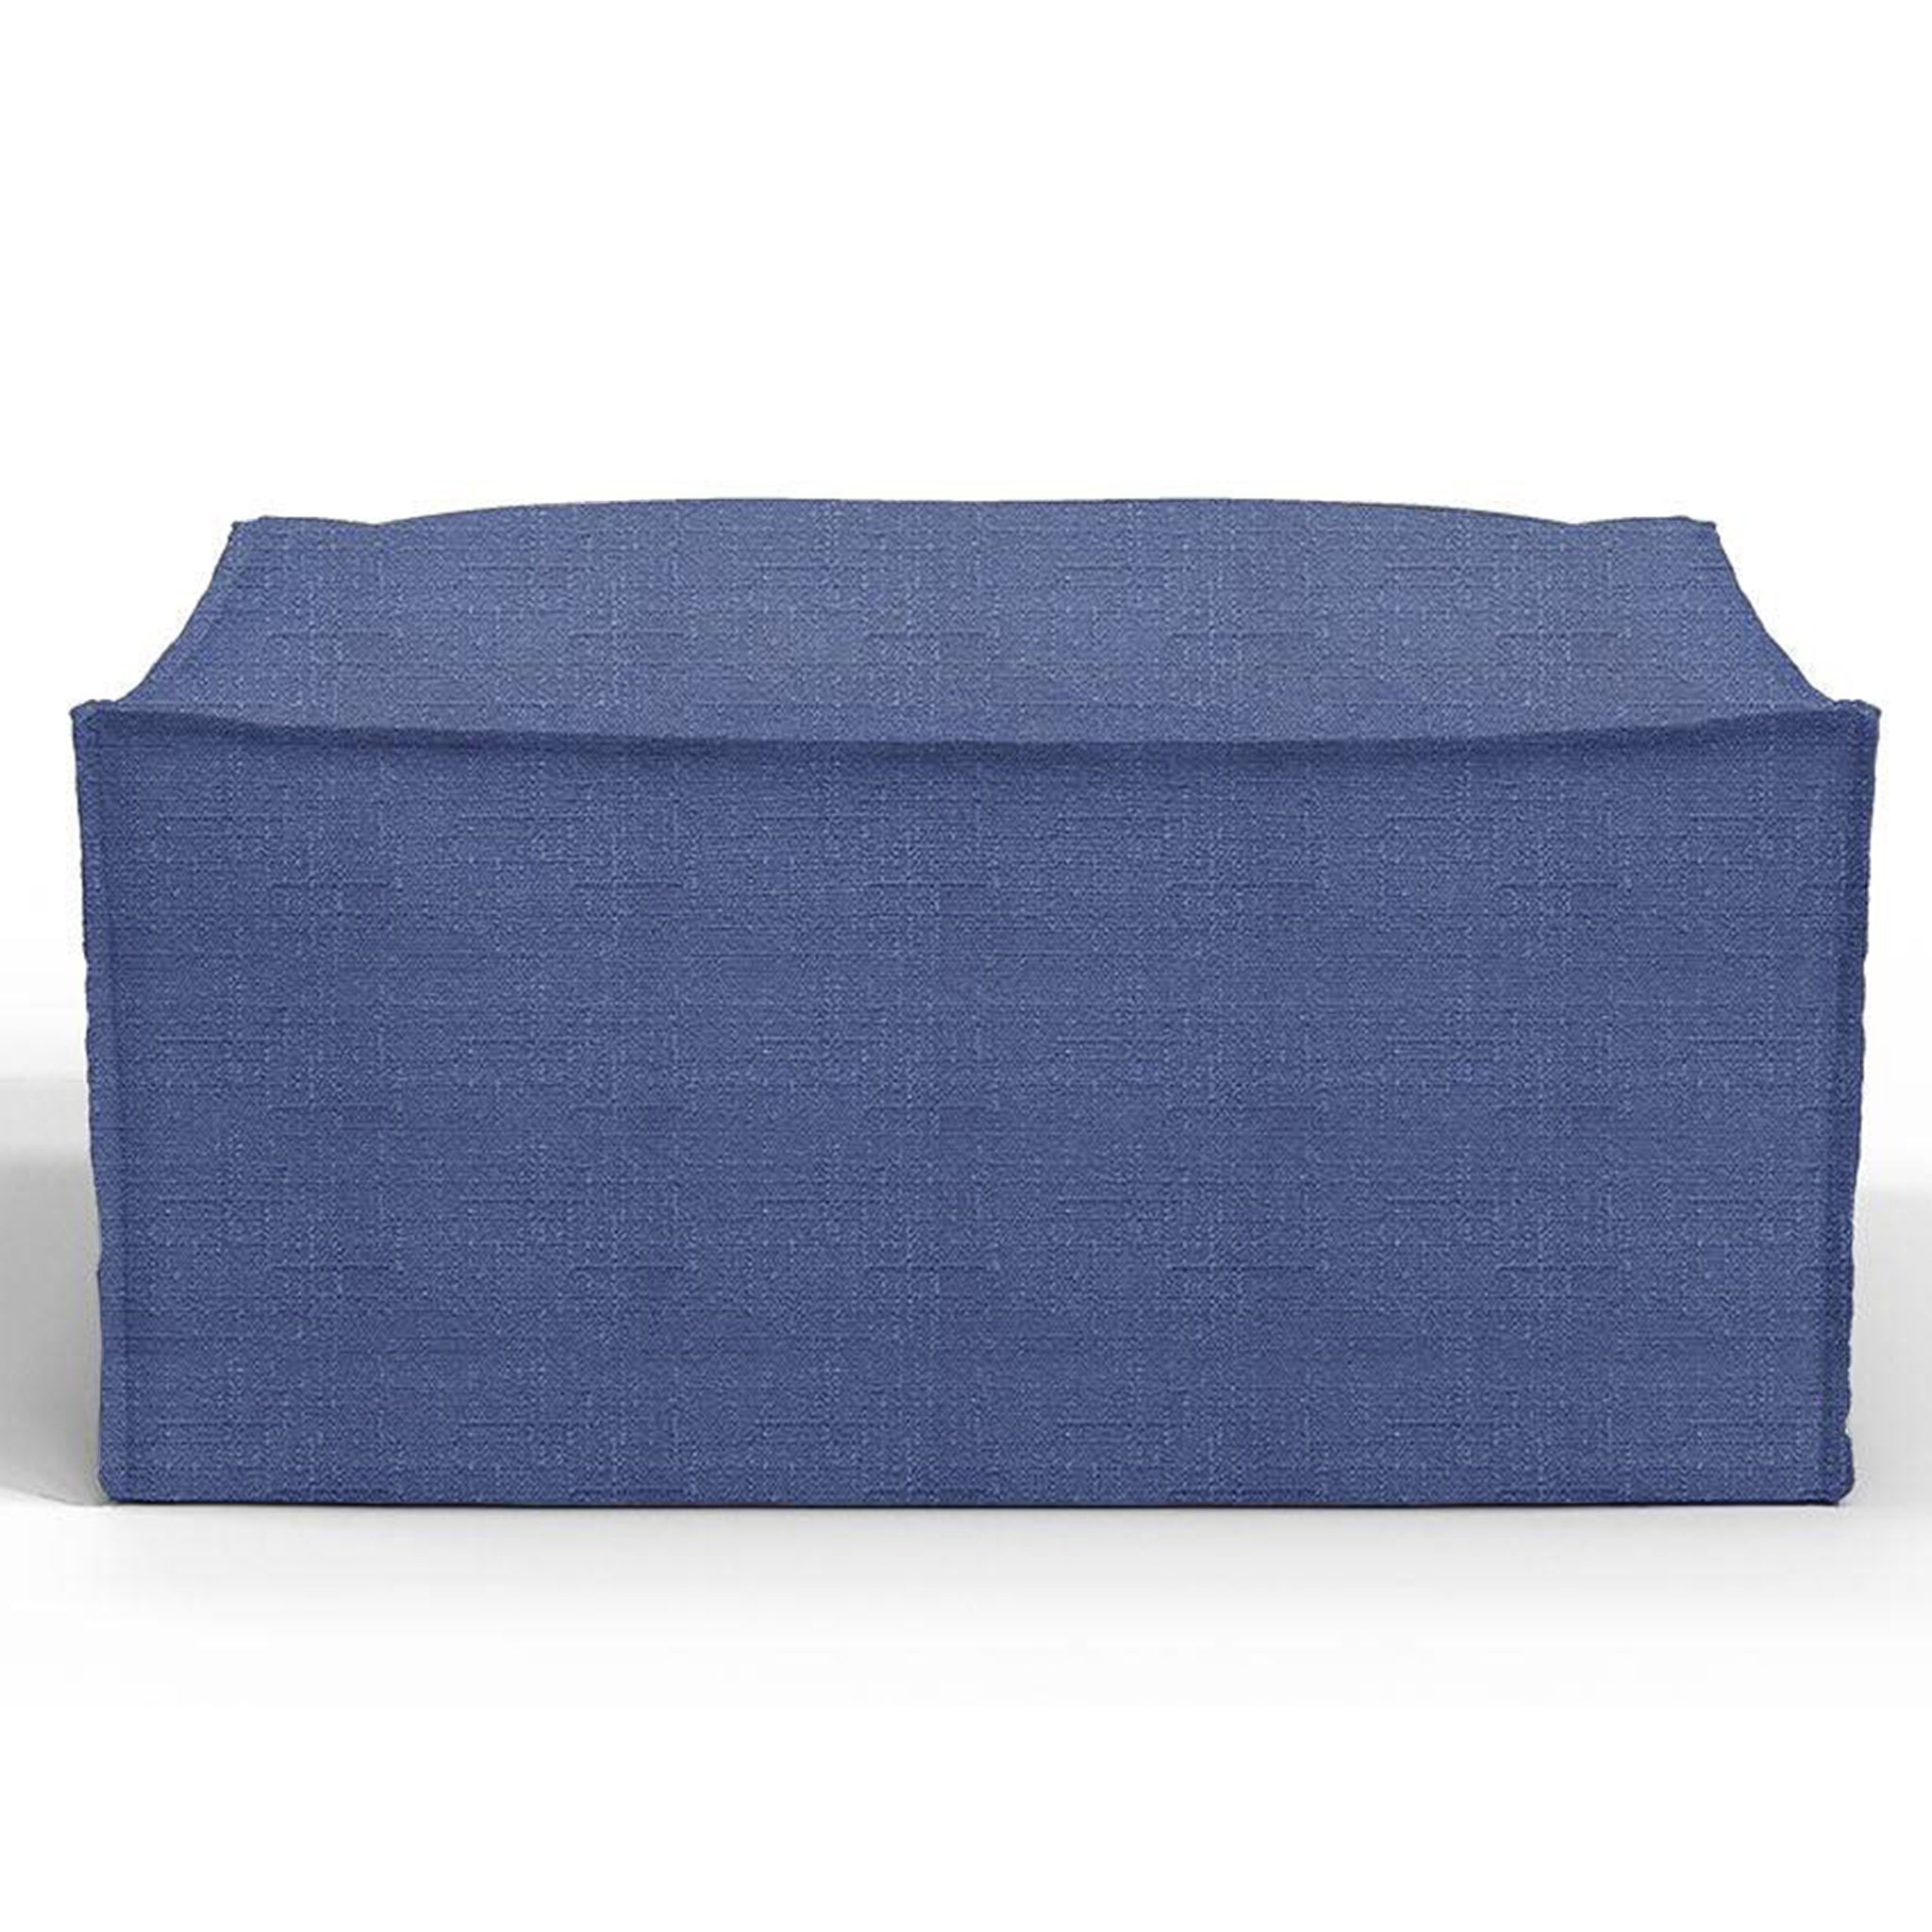 Navy blue ottoman with a modern design, perfect for adding a touch of elegance to your living room decor.